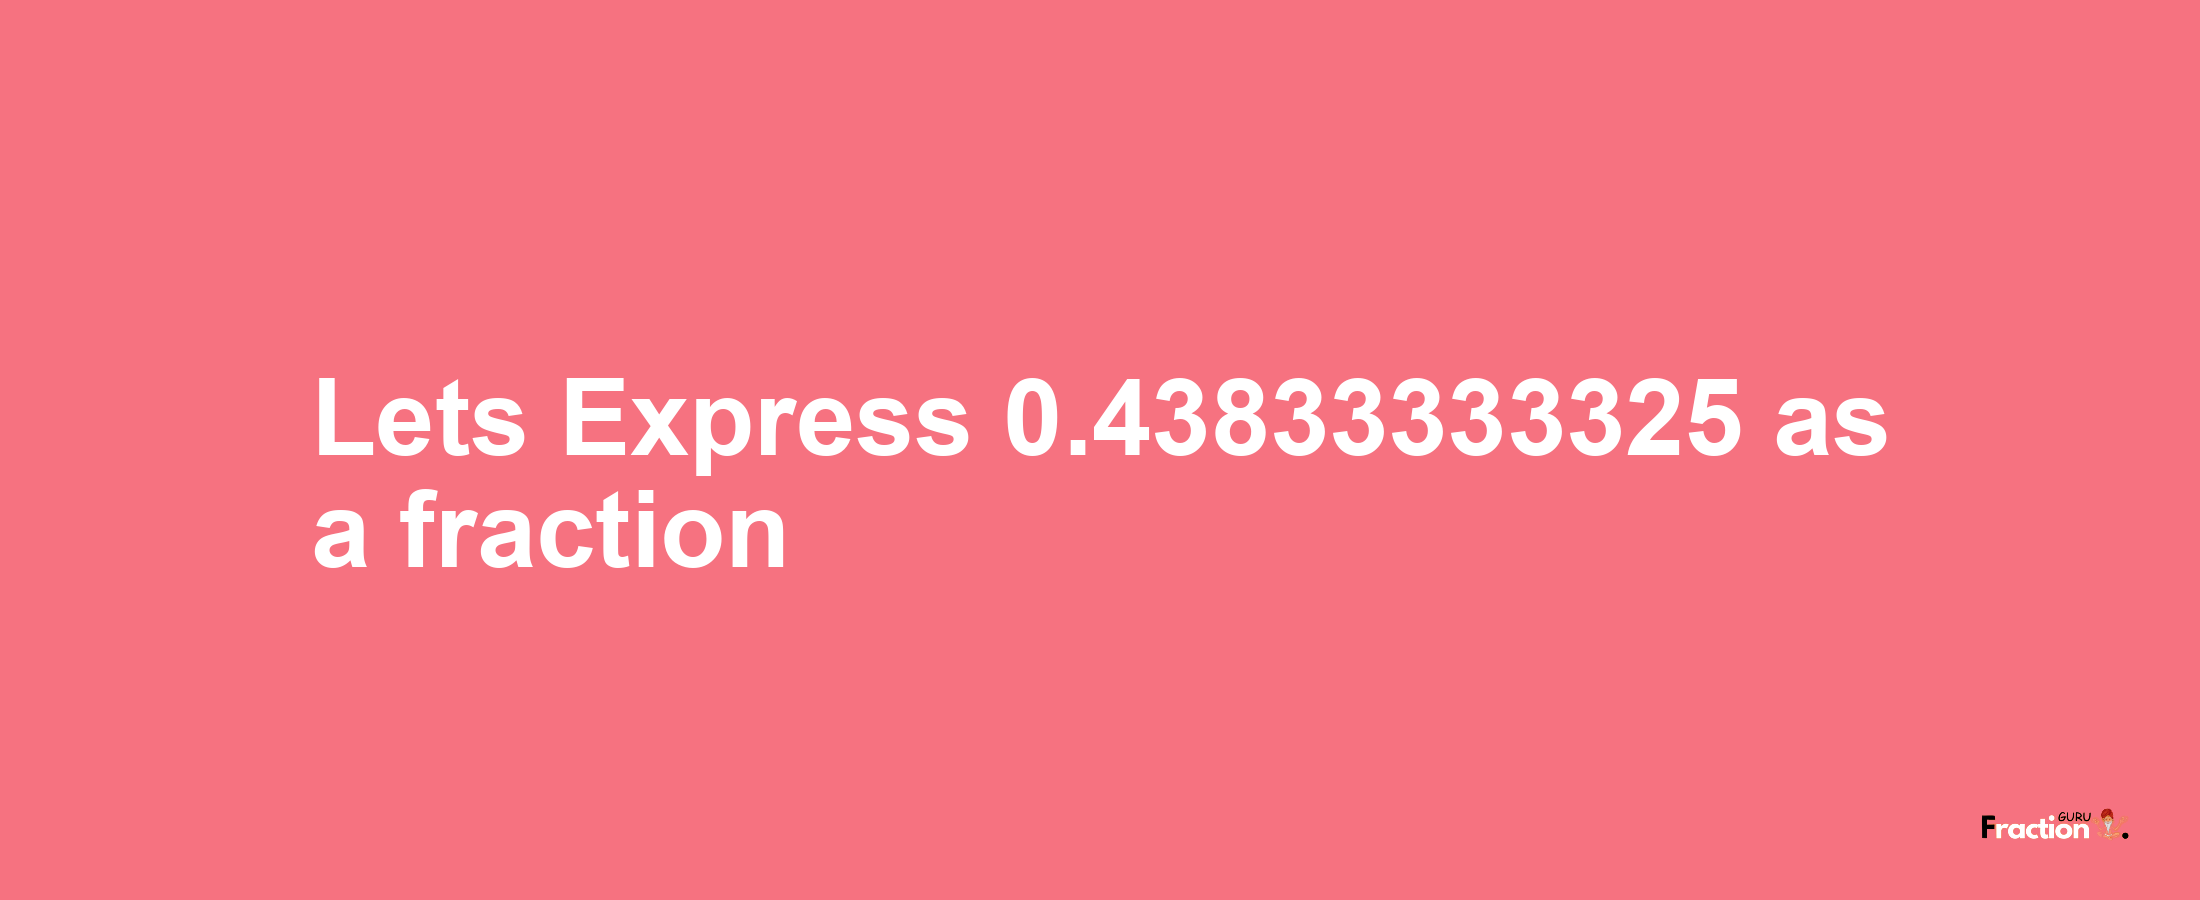 Lets Express 0.43833333325 as afraction